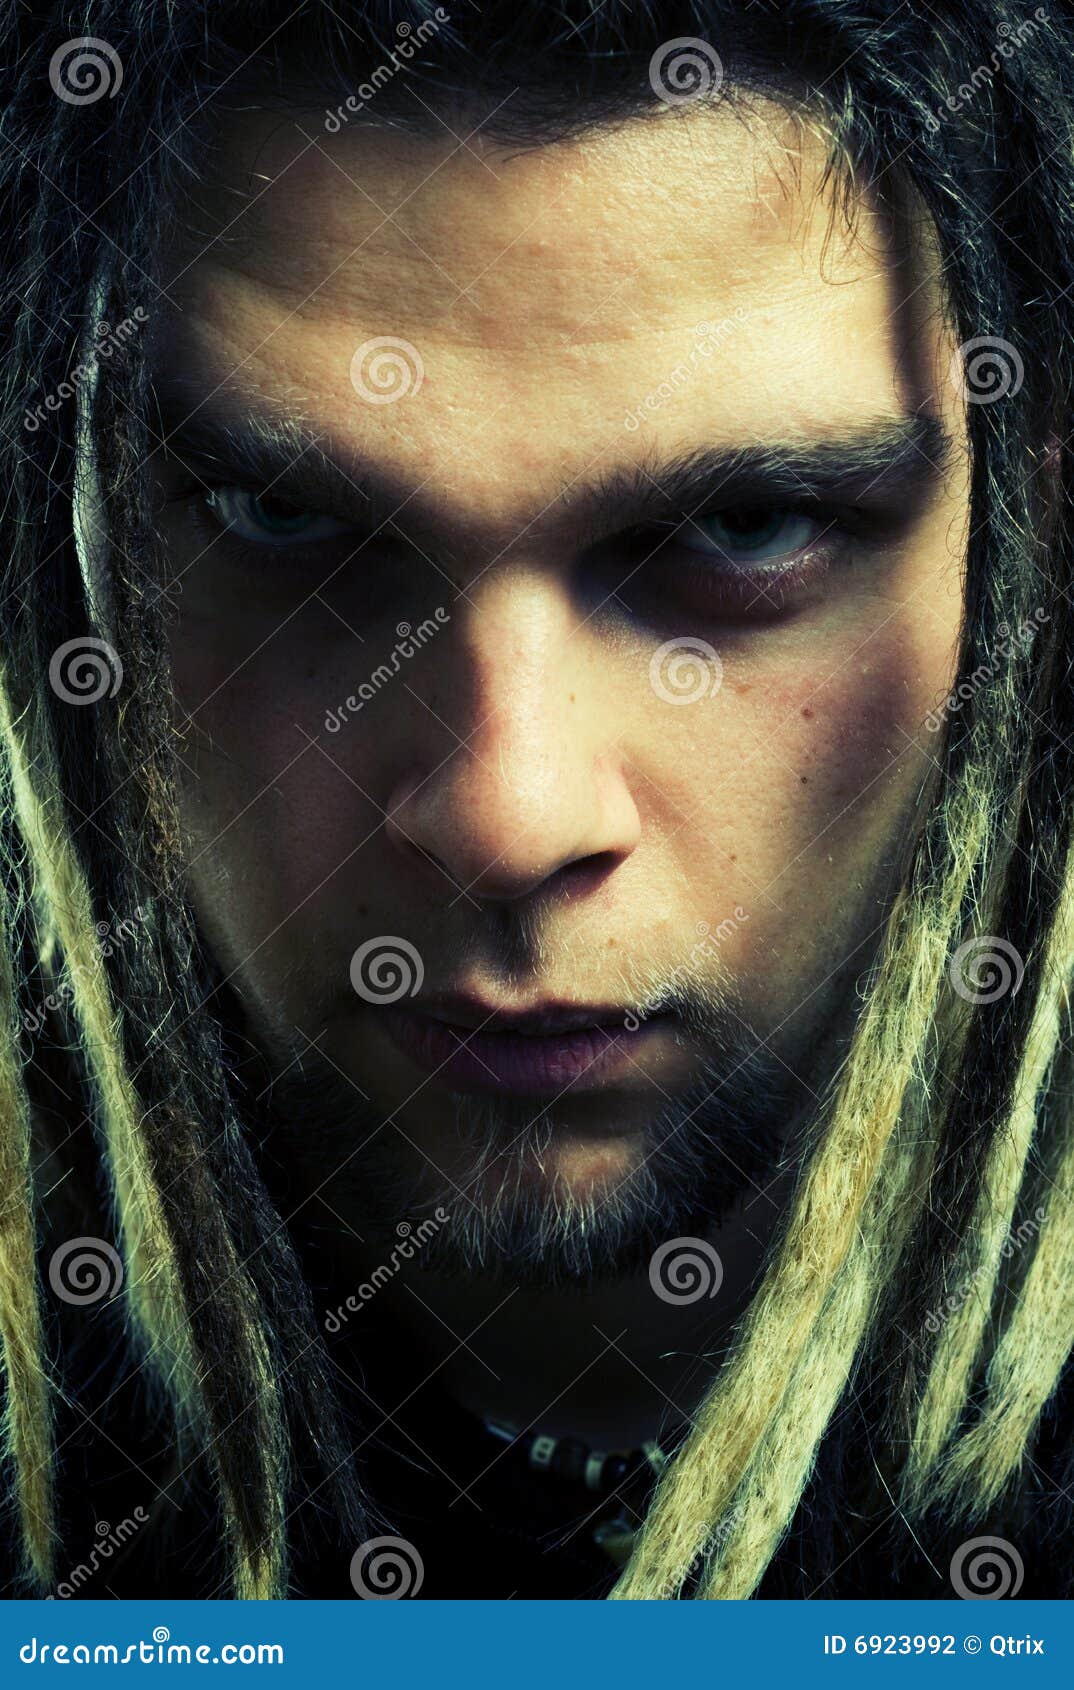 Dangerous Person. Stock Photography - Image: 6923992